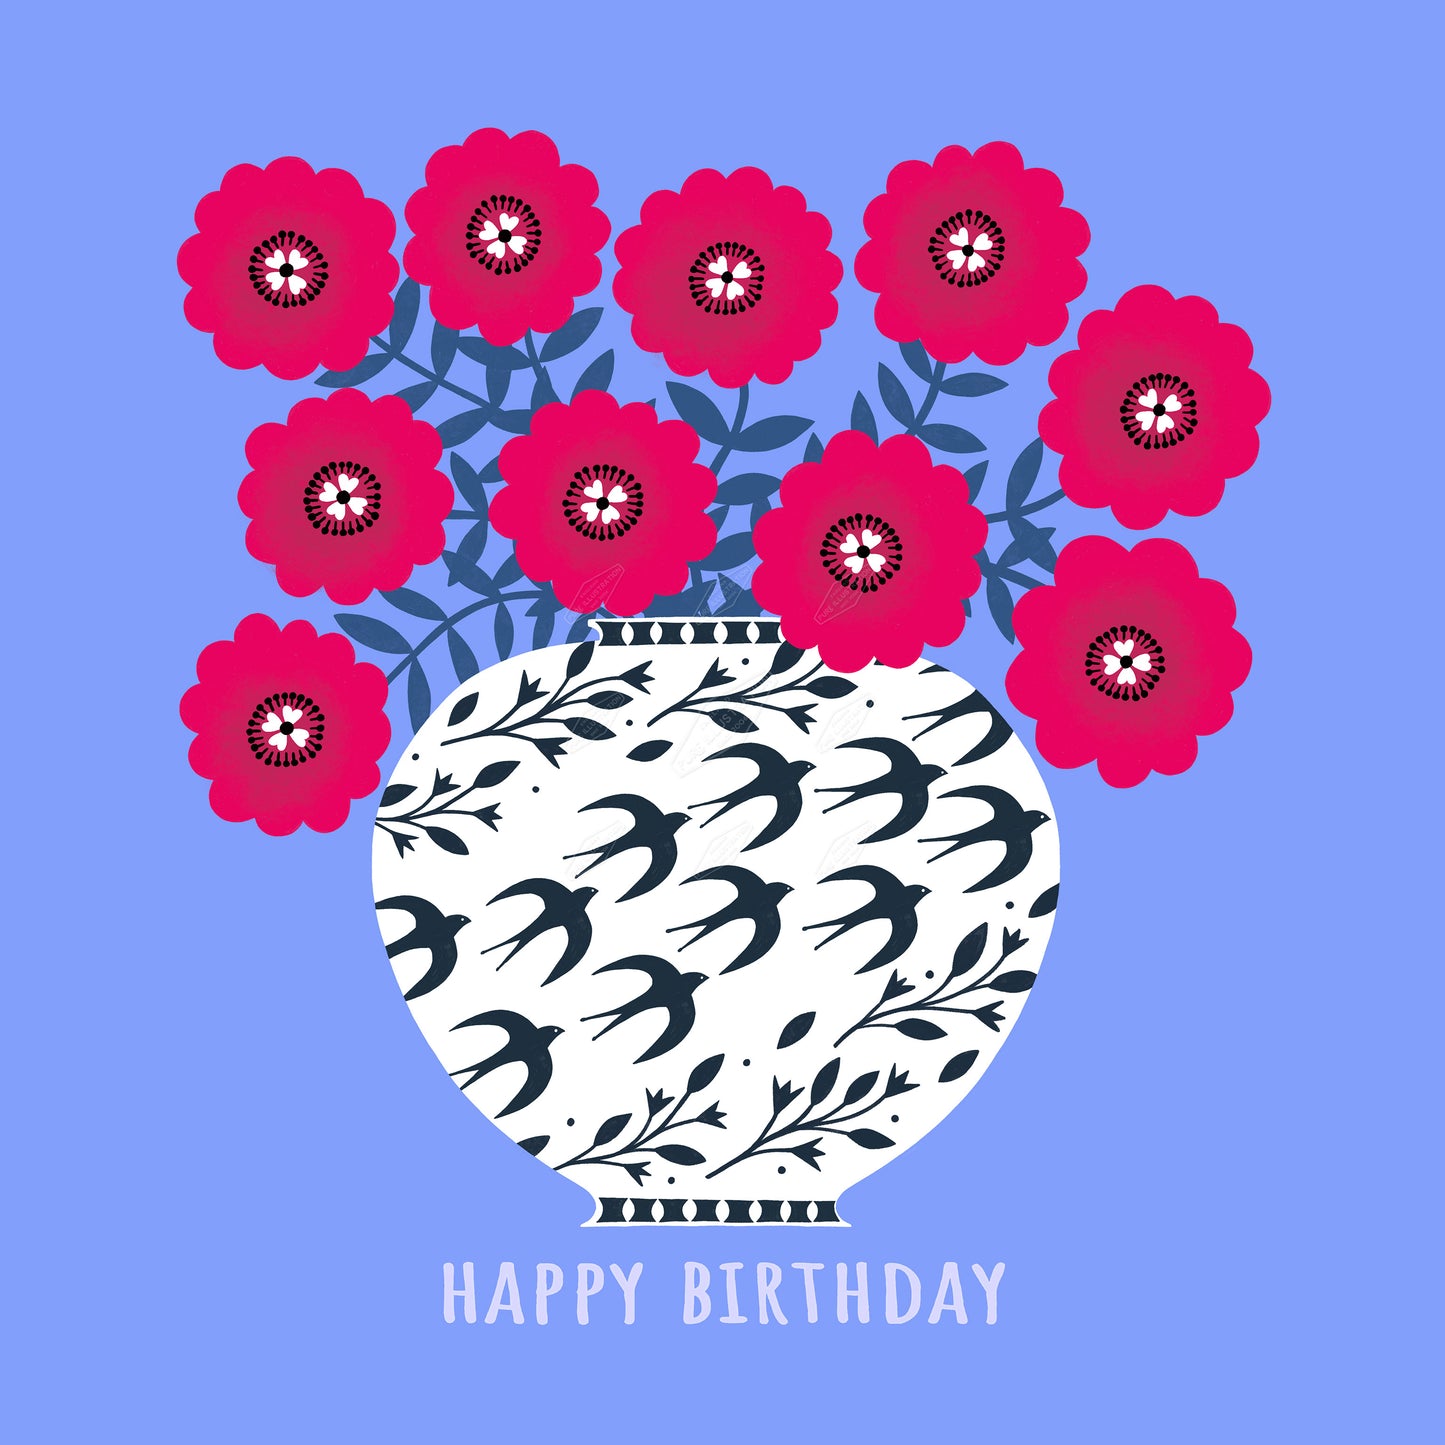 00035663SSN- Sian Summerhayes is represented by Pure Art Licensing Agency - Birthday Greeting Card Design